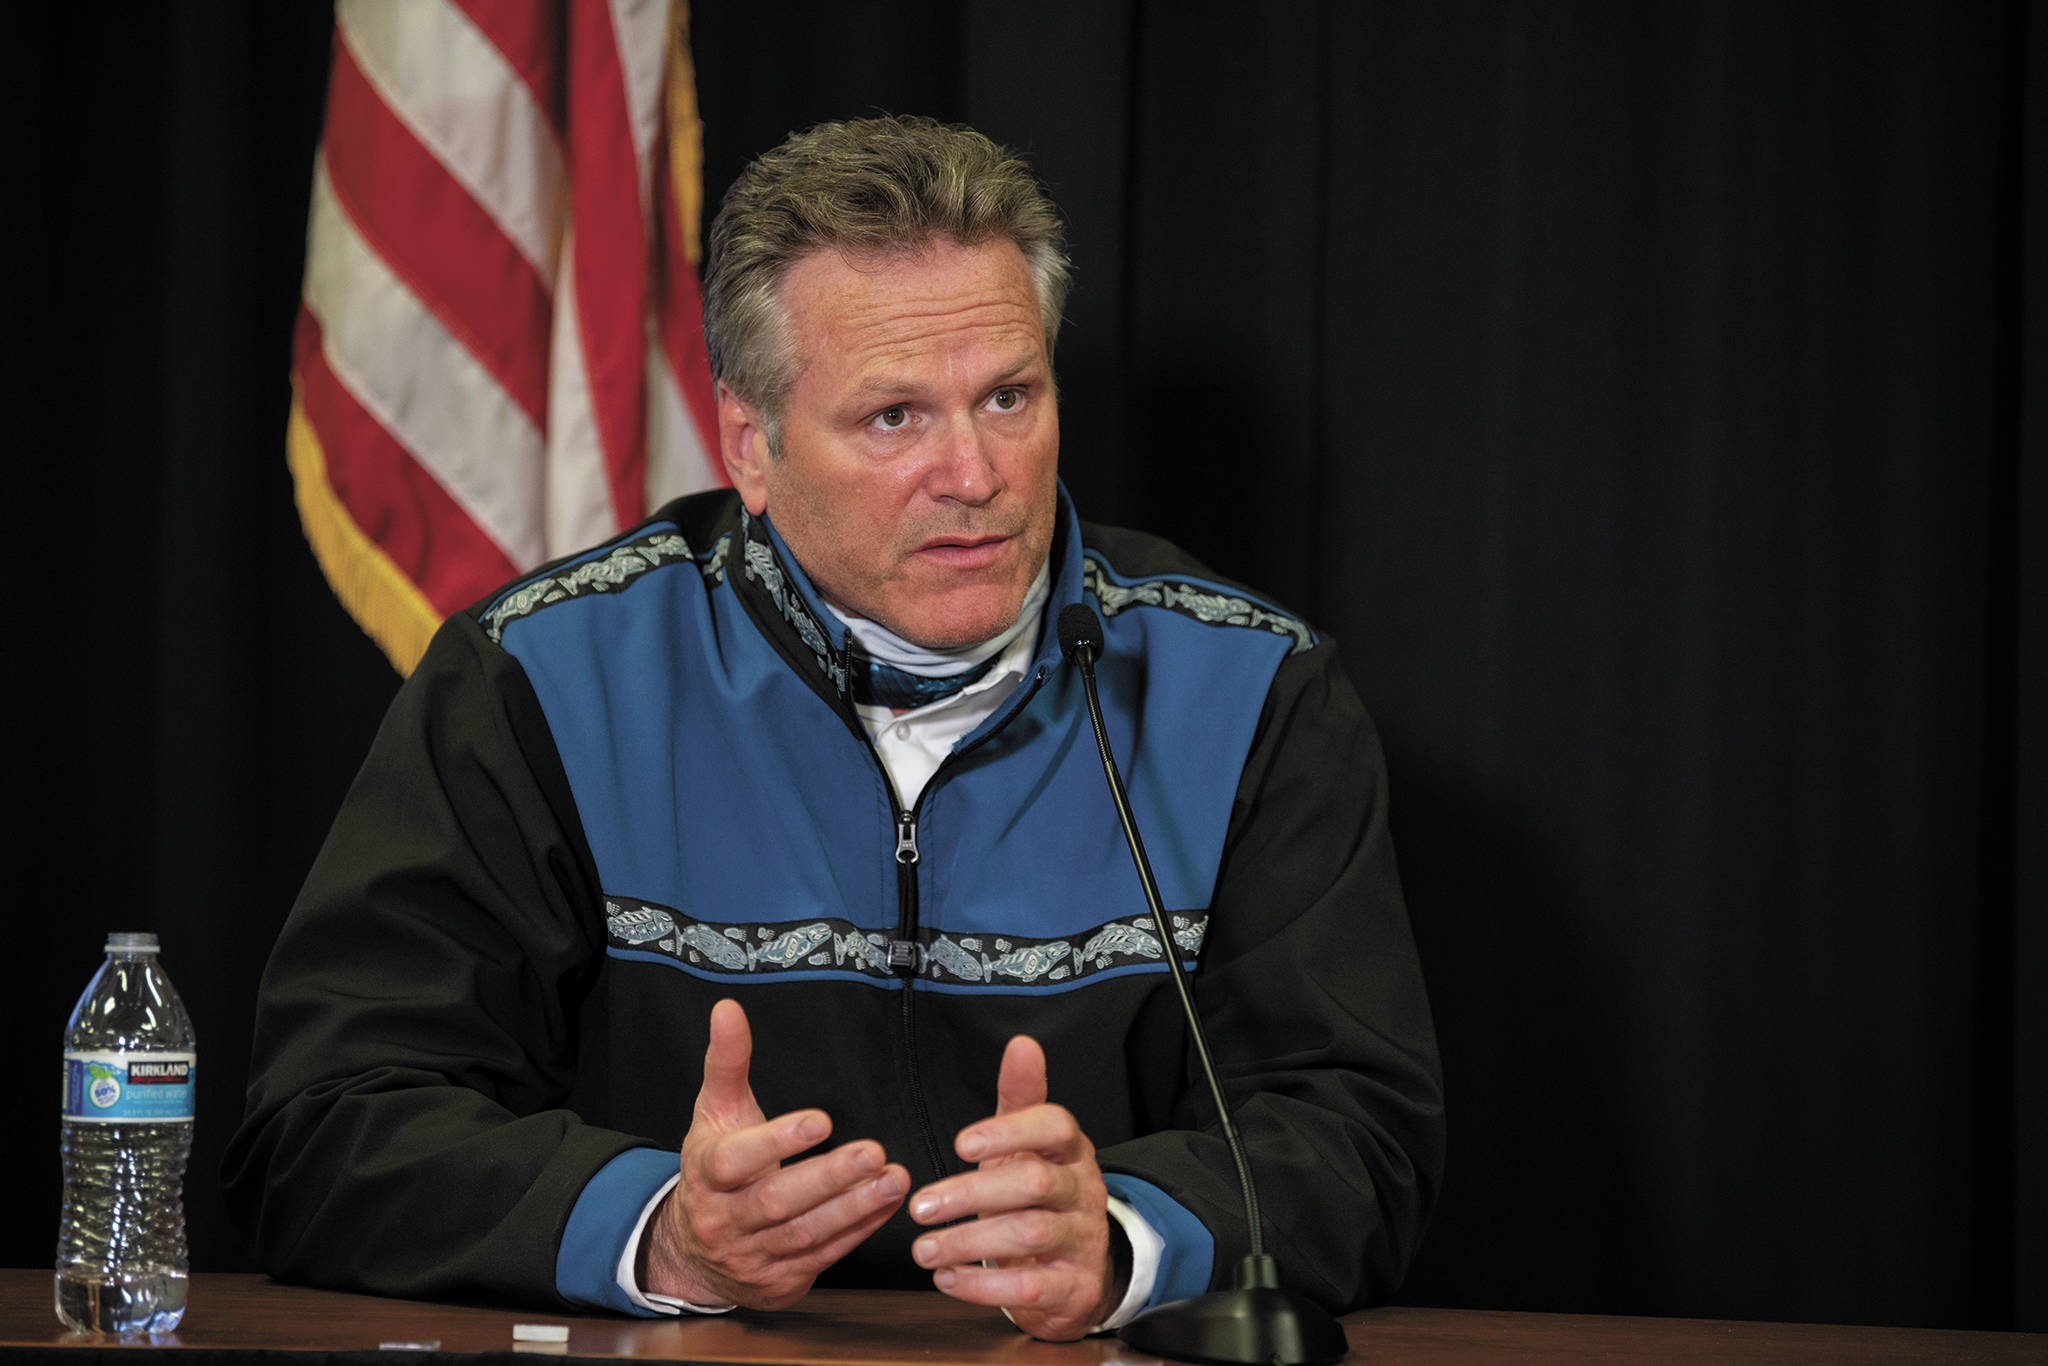 Gov. Mike Dunleavy addresses the public during a virtual town hall on Sept. 15, 2020 in Alaska. (Photo courtesy Austin McDaniel, Office of the Governor)